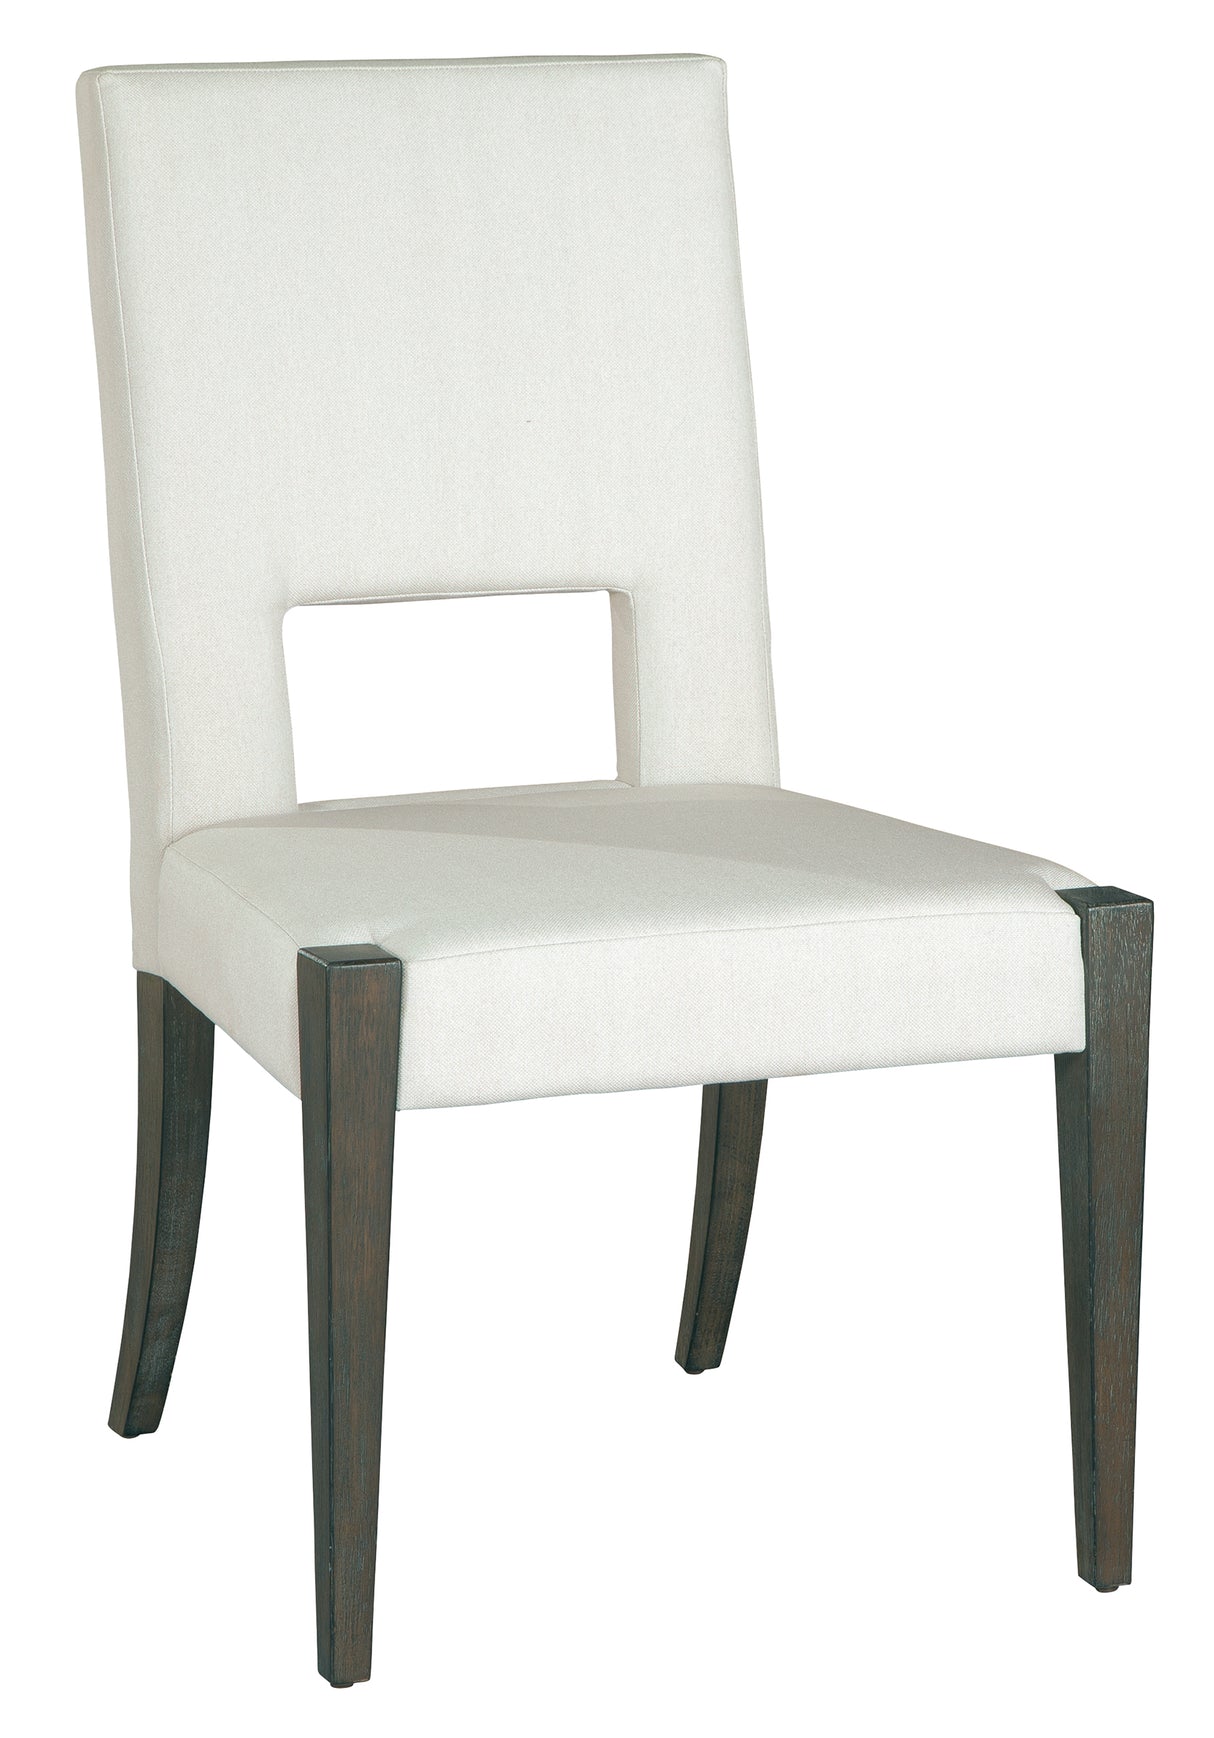 Hekman 23823 Edgewater 22.25in. x 38in. x 38in. Upholstered Side Chair